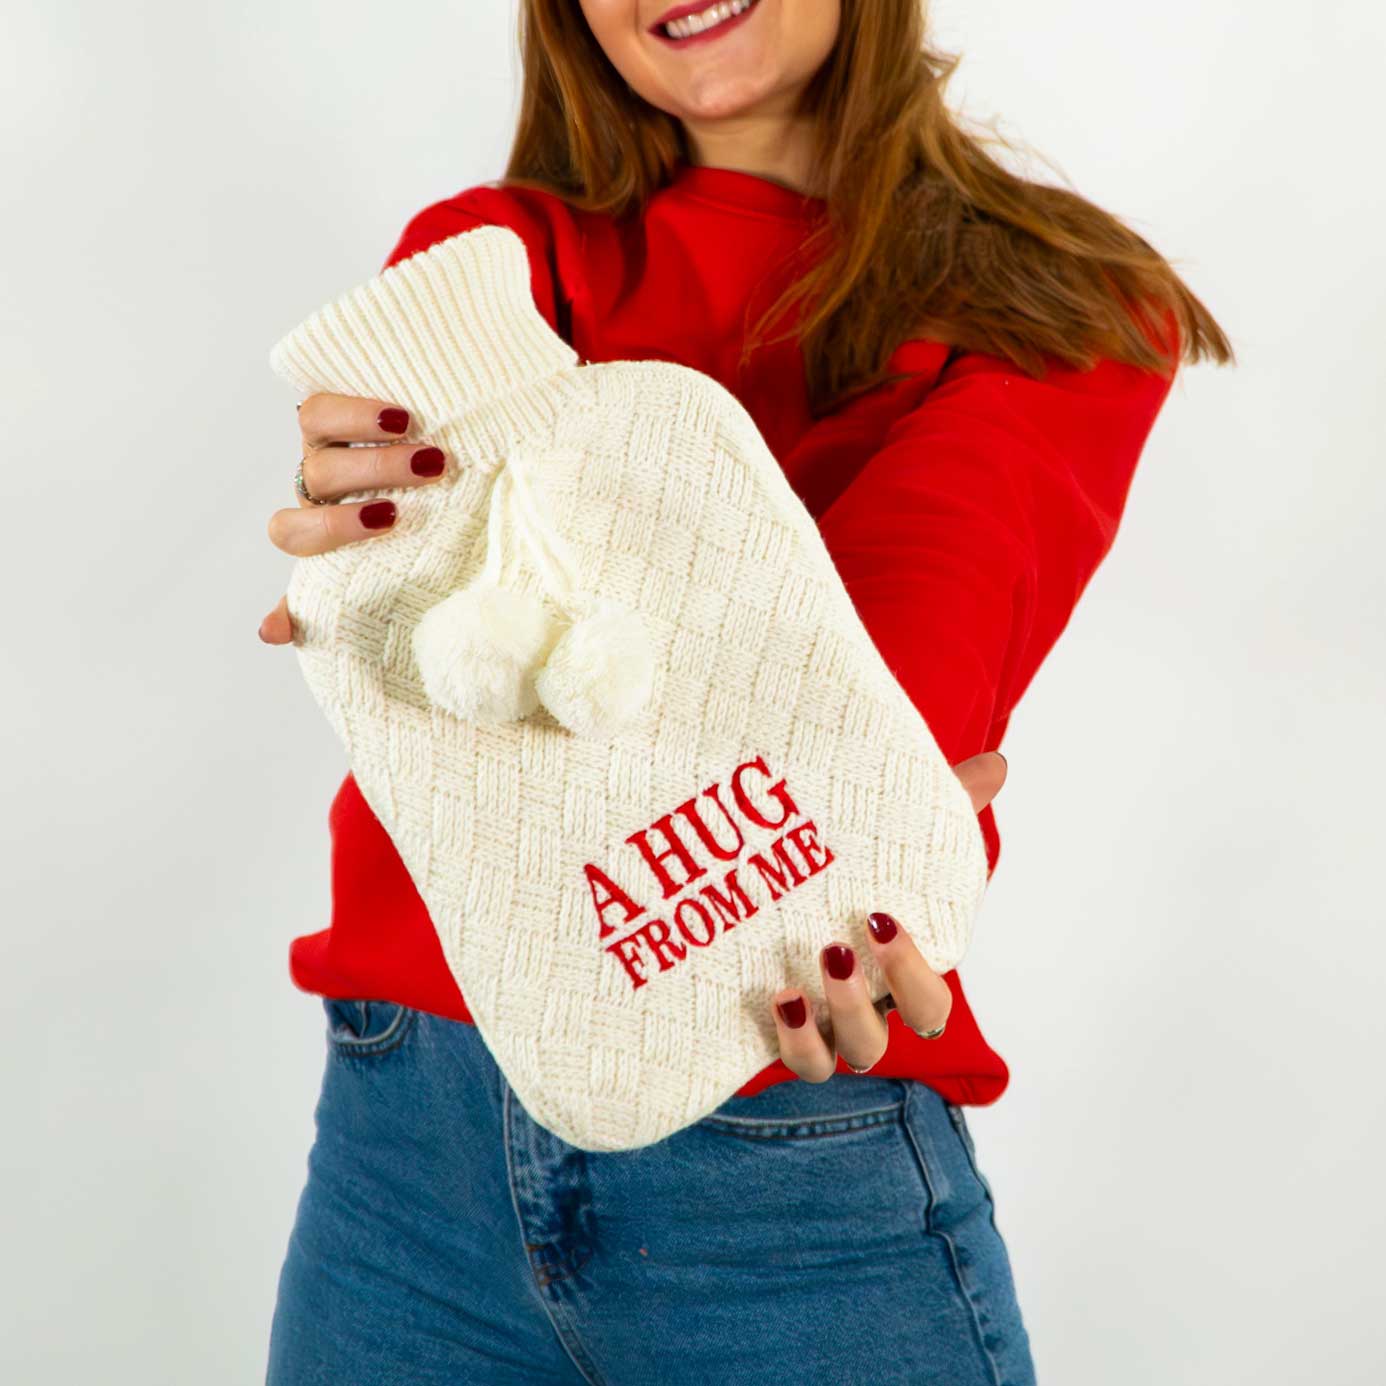 A Hug from Me Knitted Hot Water Bottle